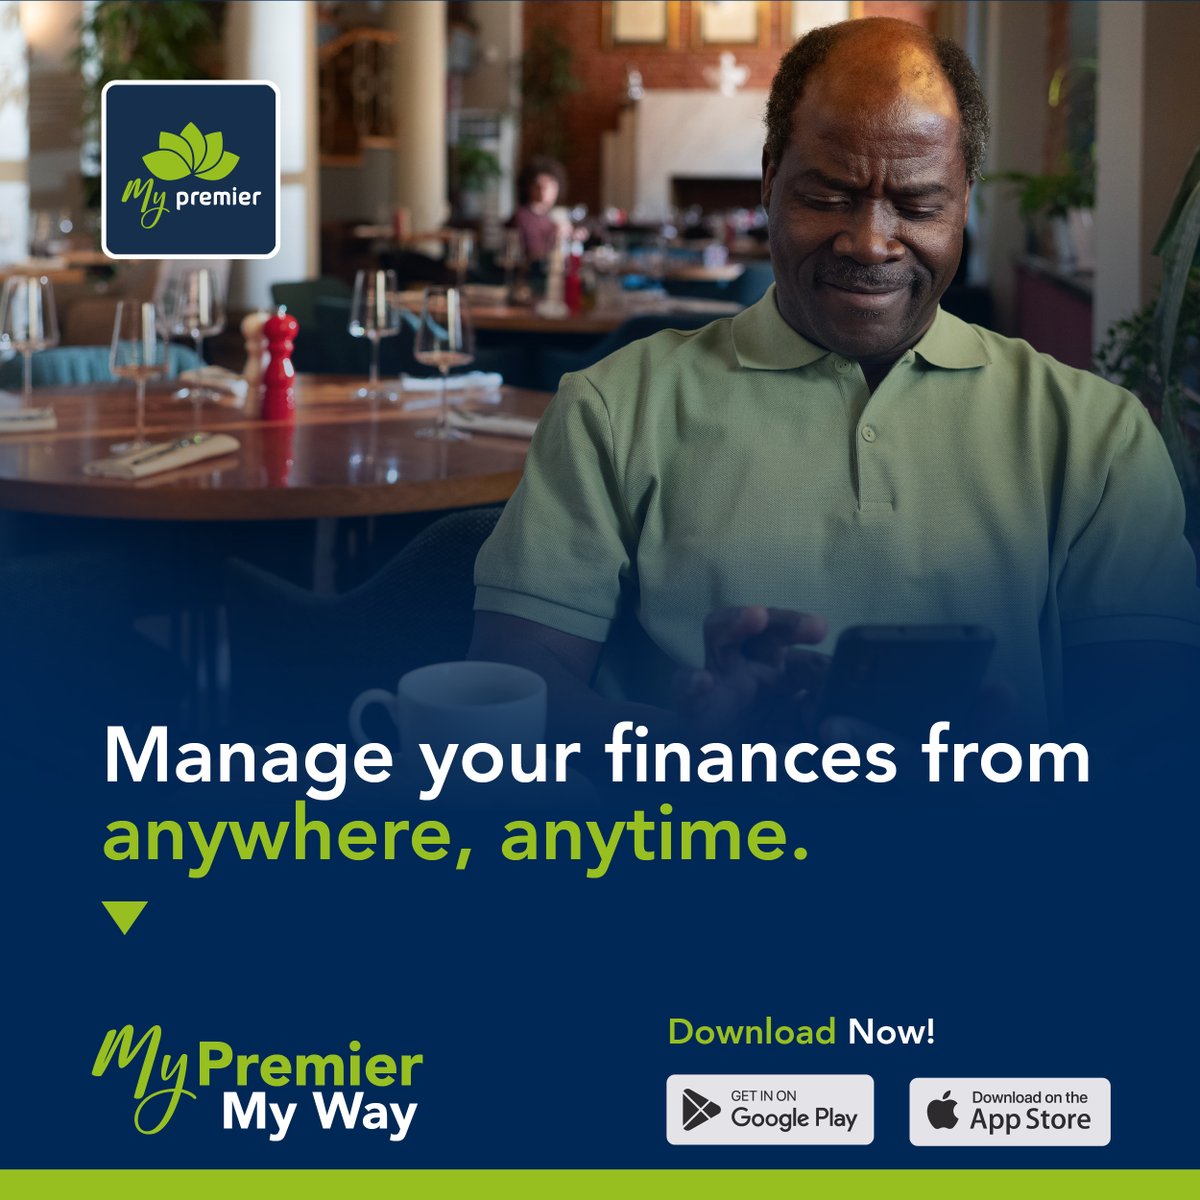 Shariah Compliant banking tailored to work for you, skip the long lines and bank anywhere, anytime with My Premier App. Available for download here! #MyPremierMyWay #PremierBank #ShariahCompliant